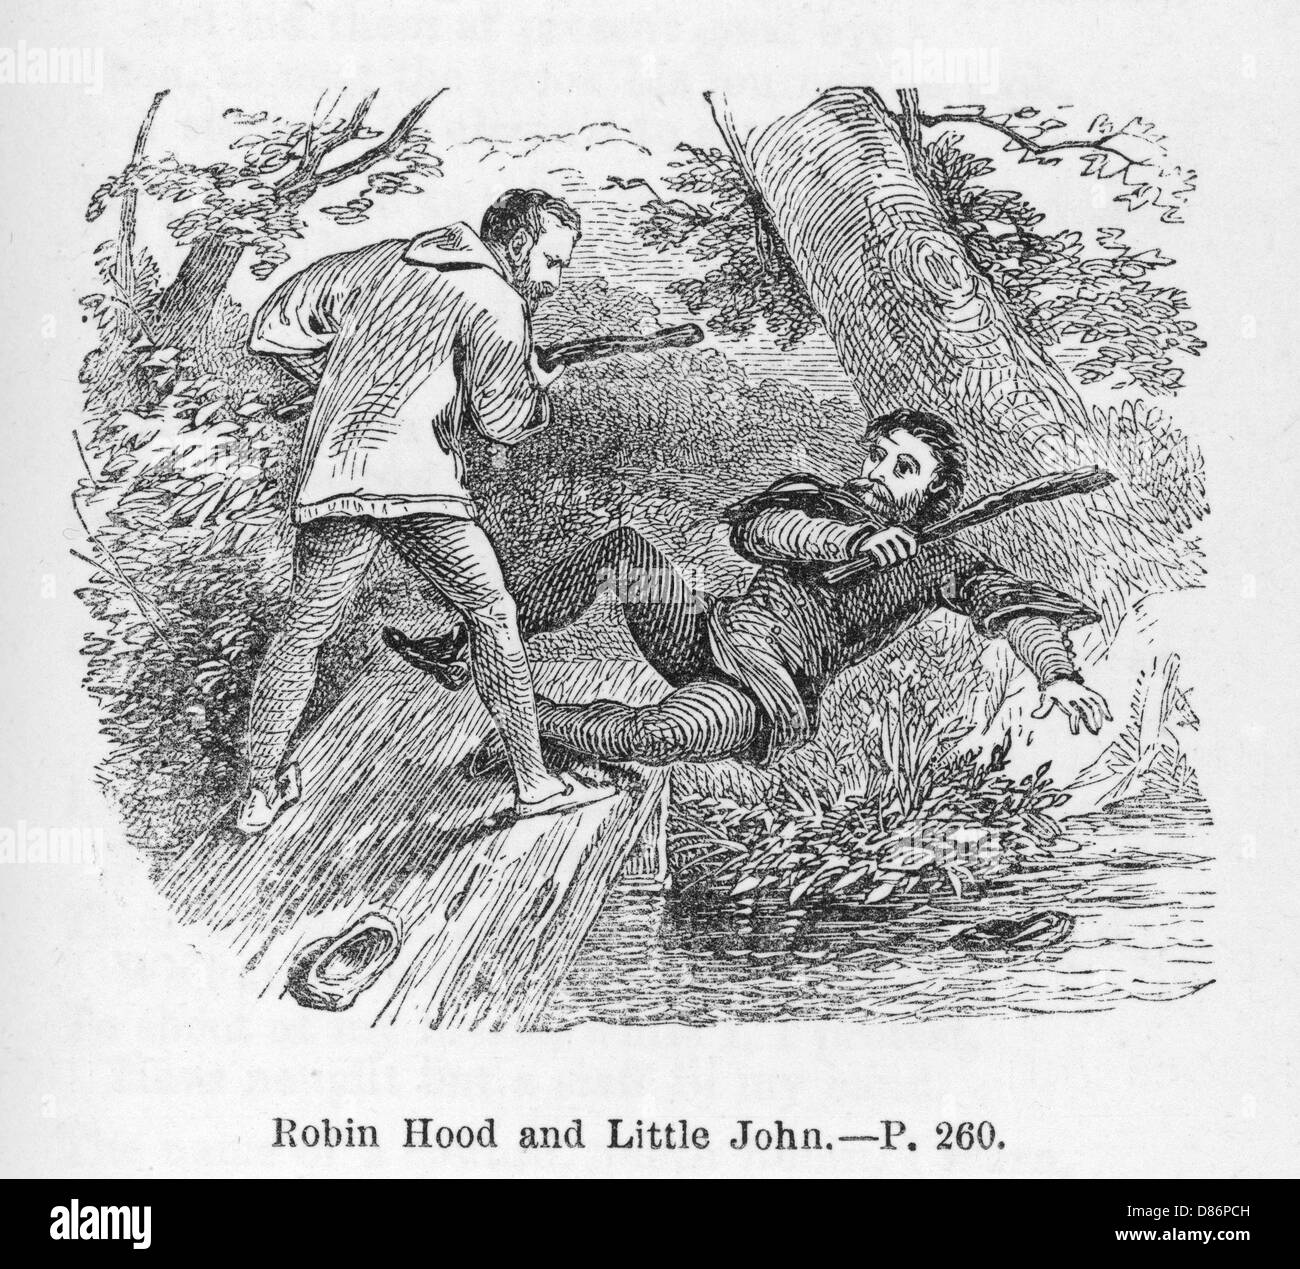 Robin Hood and Little John fighting by a stream Stock Photo